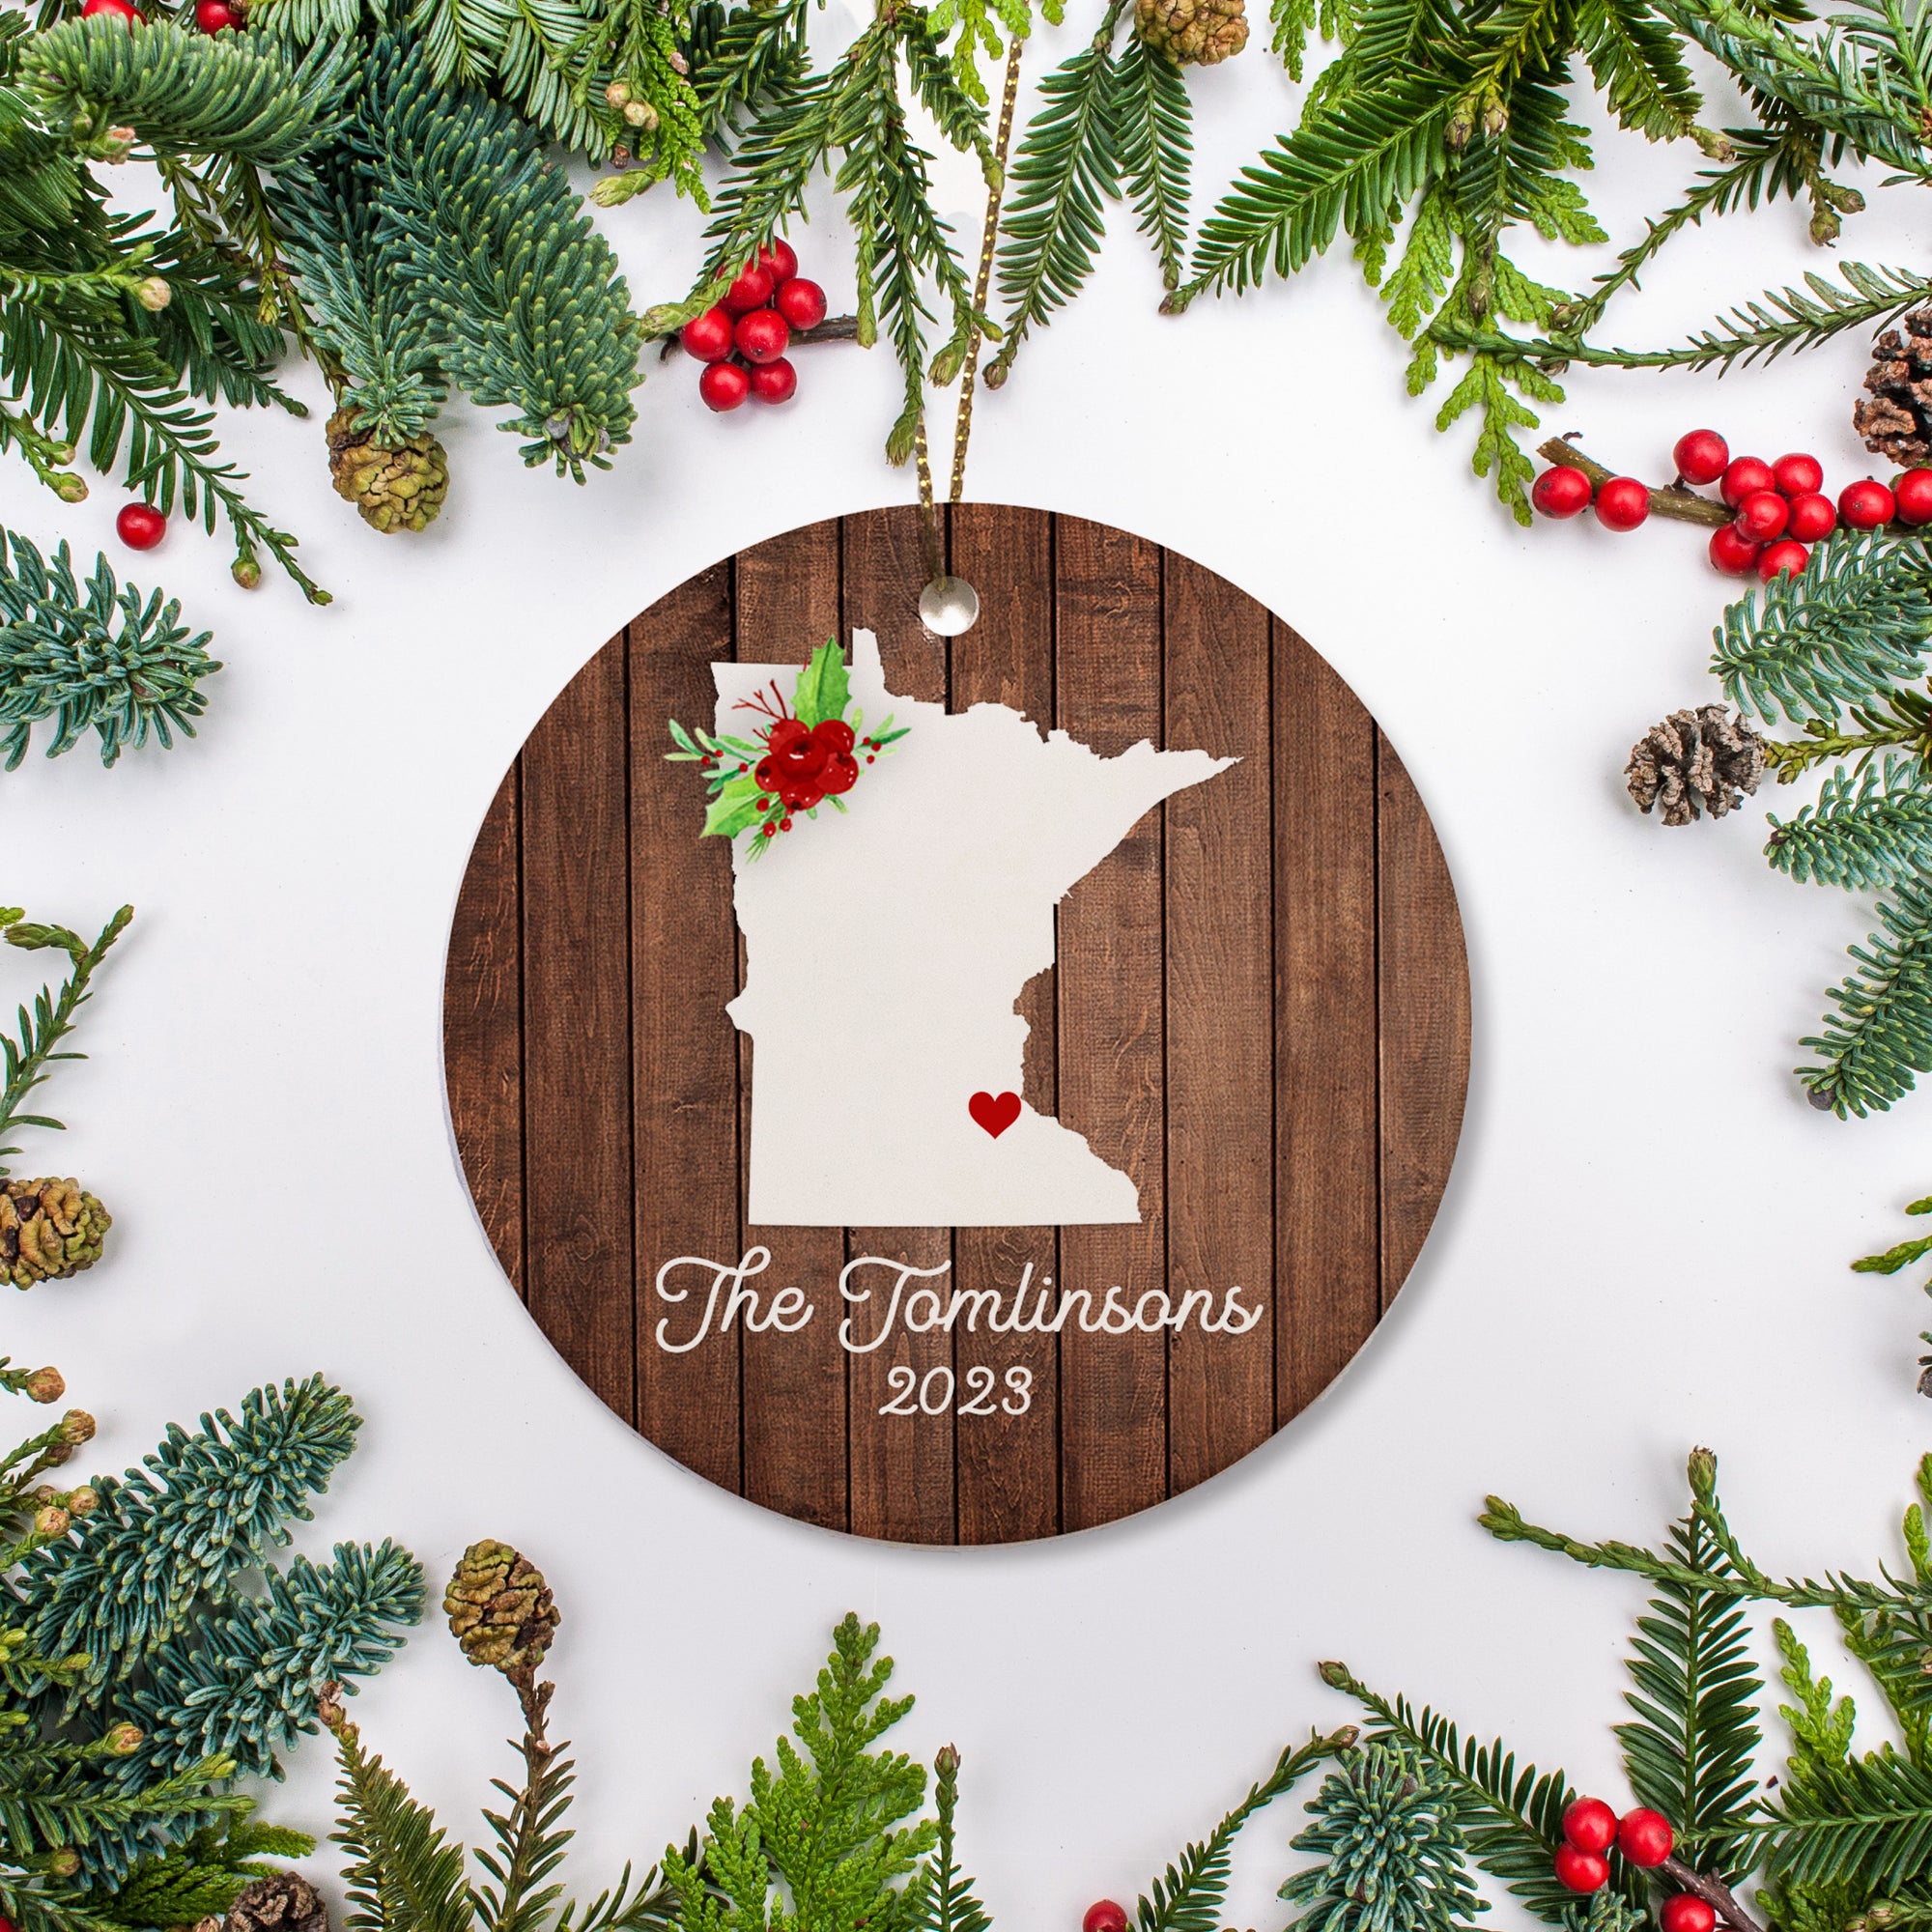 Minnesota state christmas ornament. Personalized with your name, city, and year. Ceramic keepsake ornament with a gold hanging string. Great for a college student, new home owners, just moved, or vacation memory